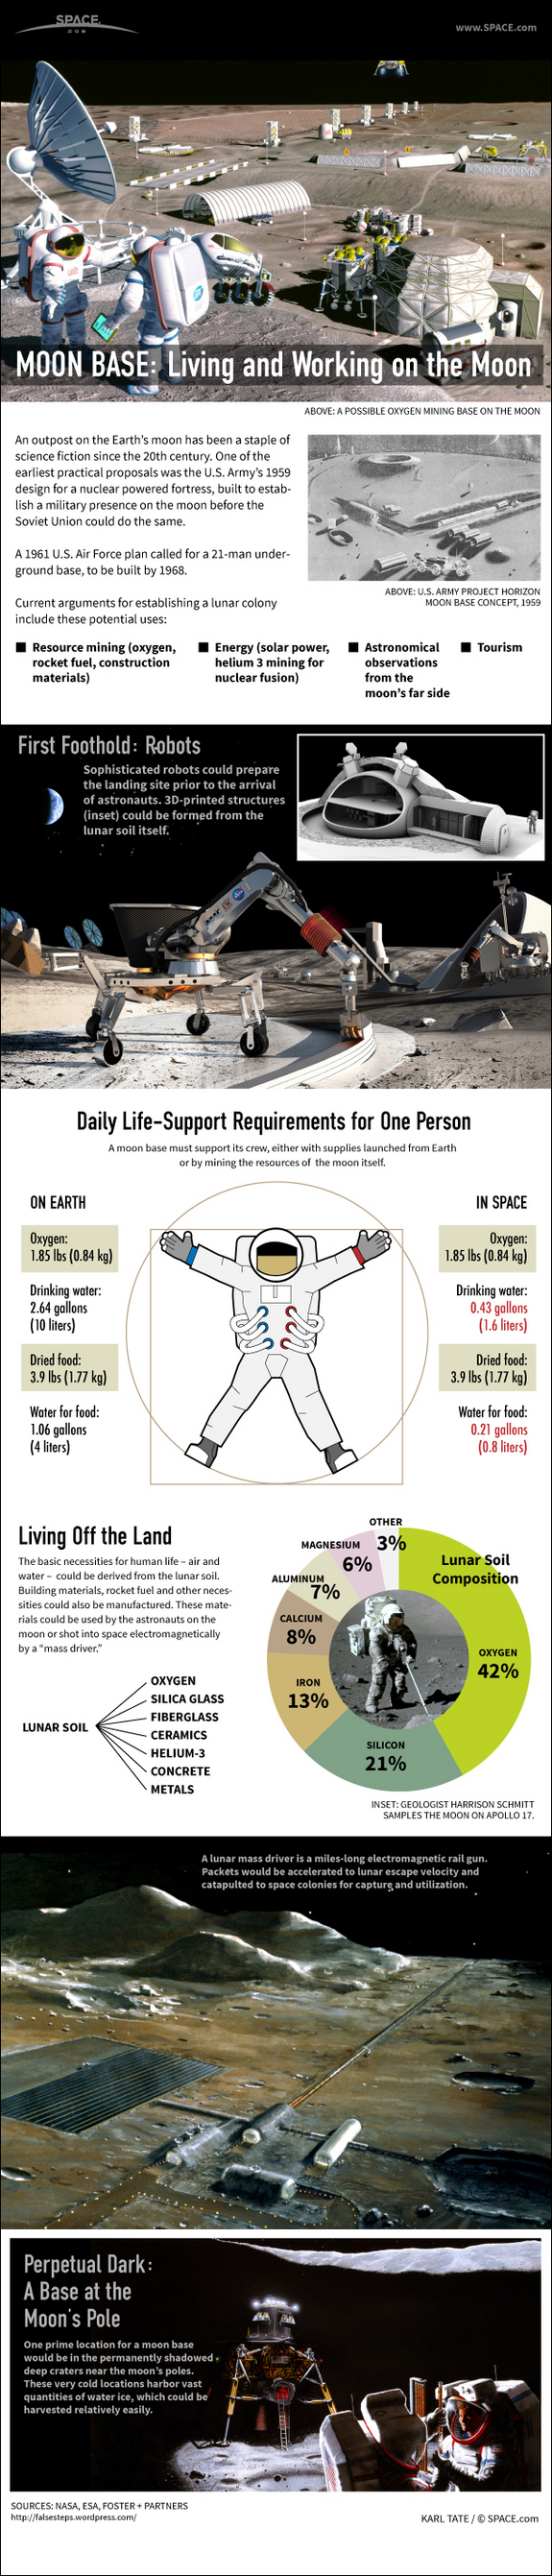 Find out how future moon bases could work in this SPACE.com infographic.